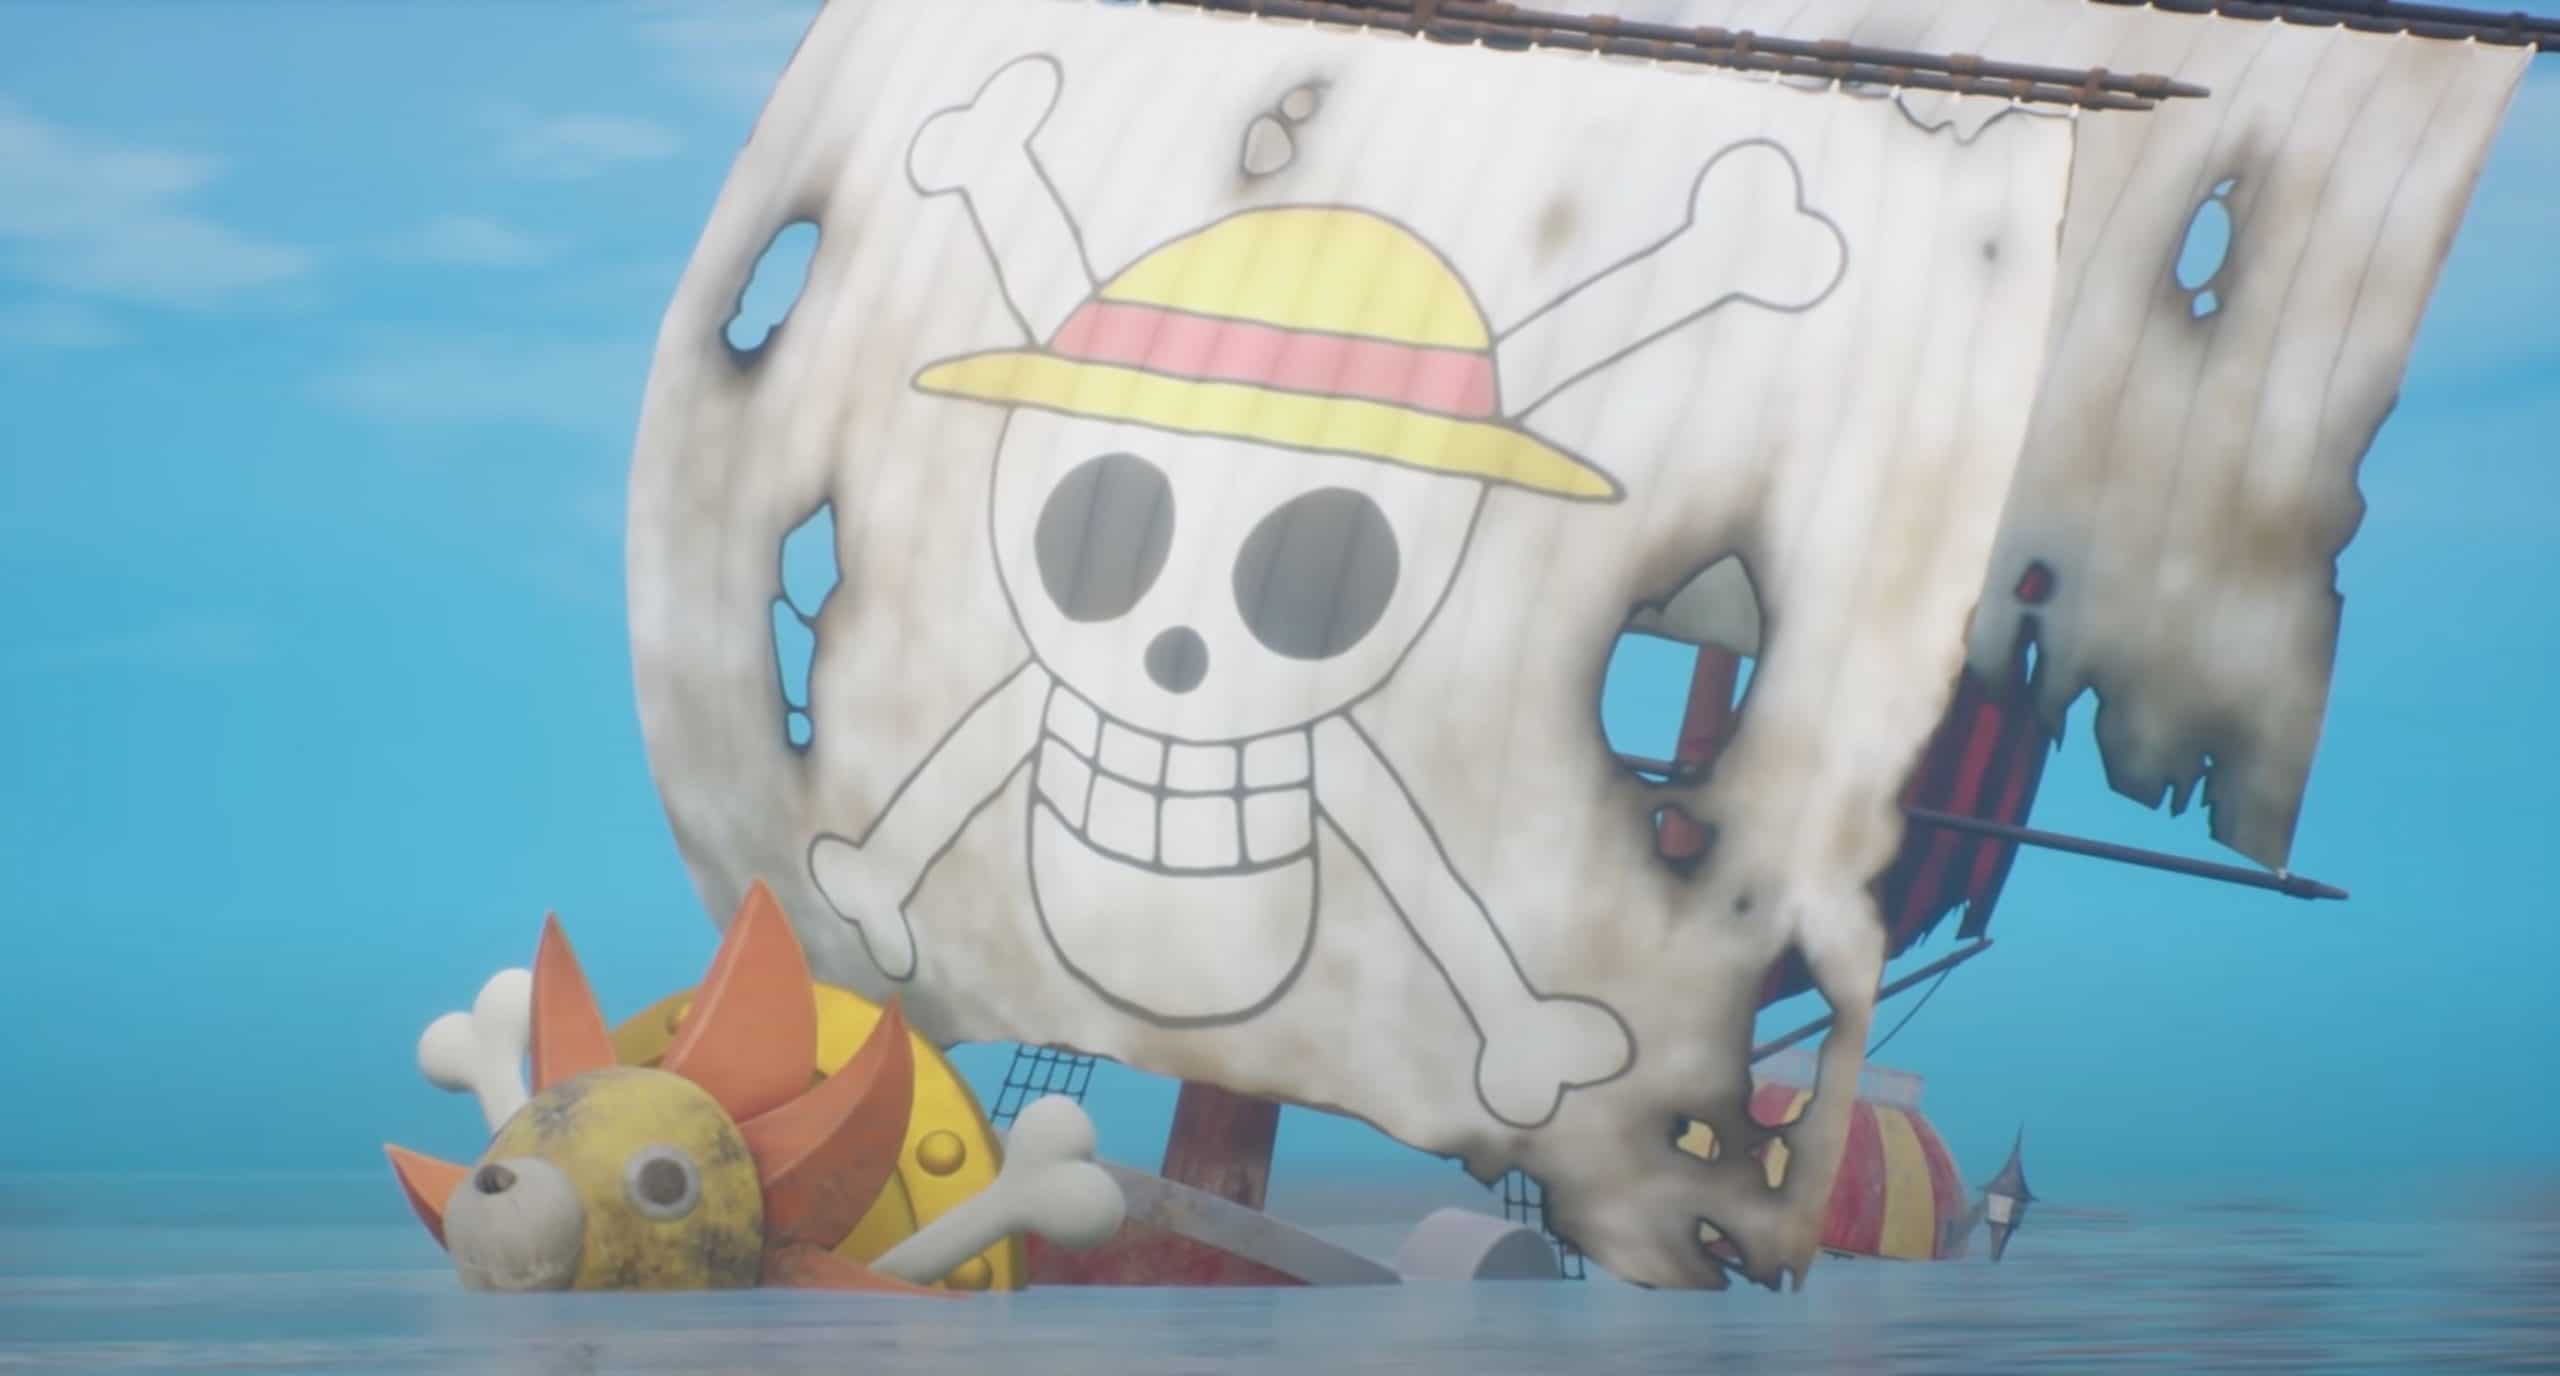 One Piece Odyssey announced, a JRPG game coming this year